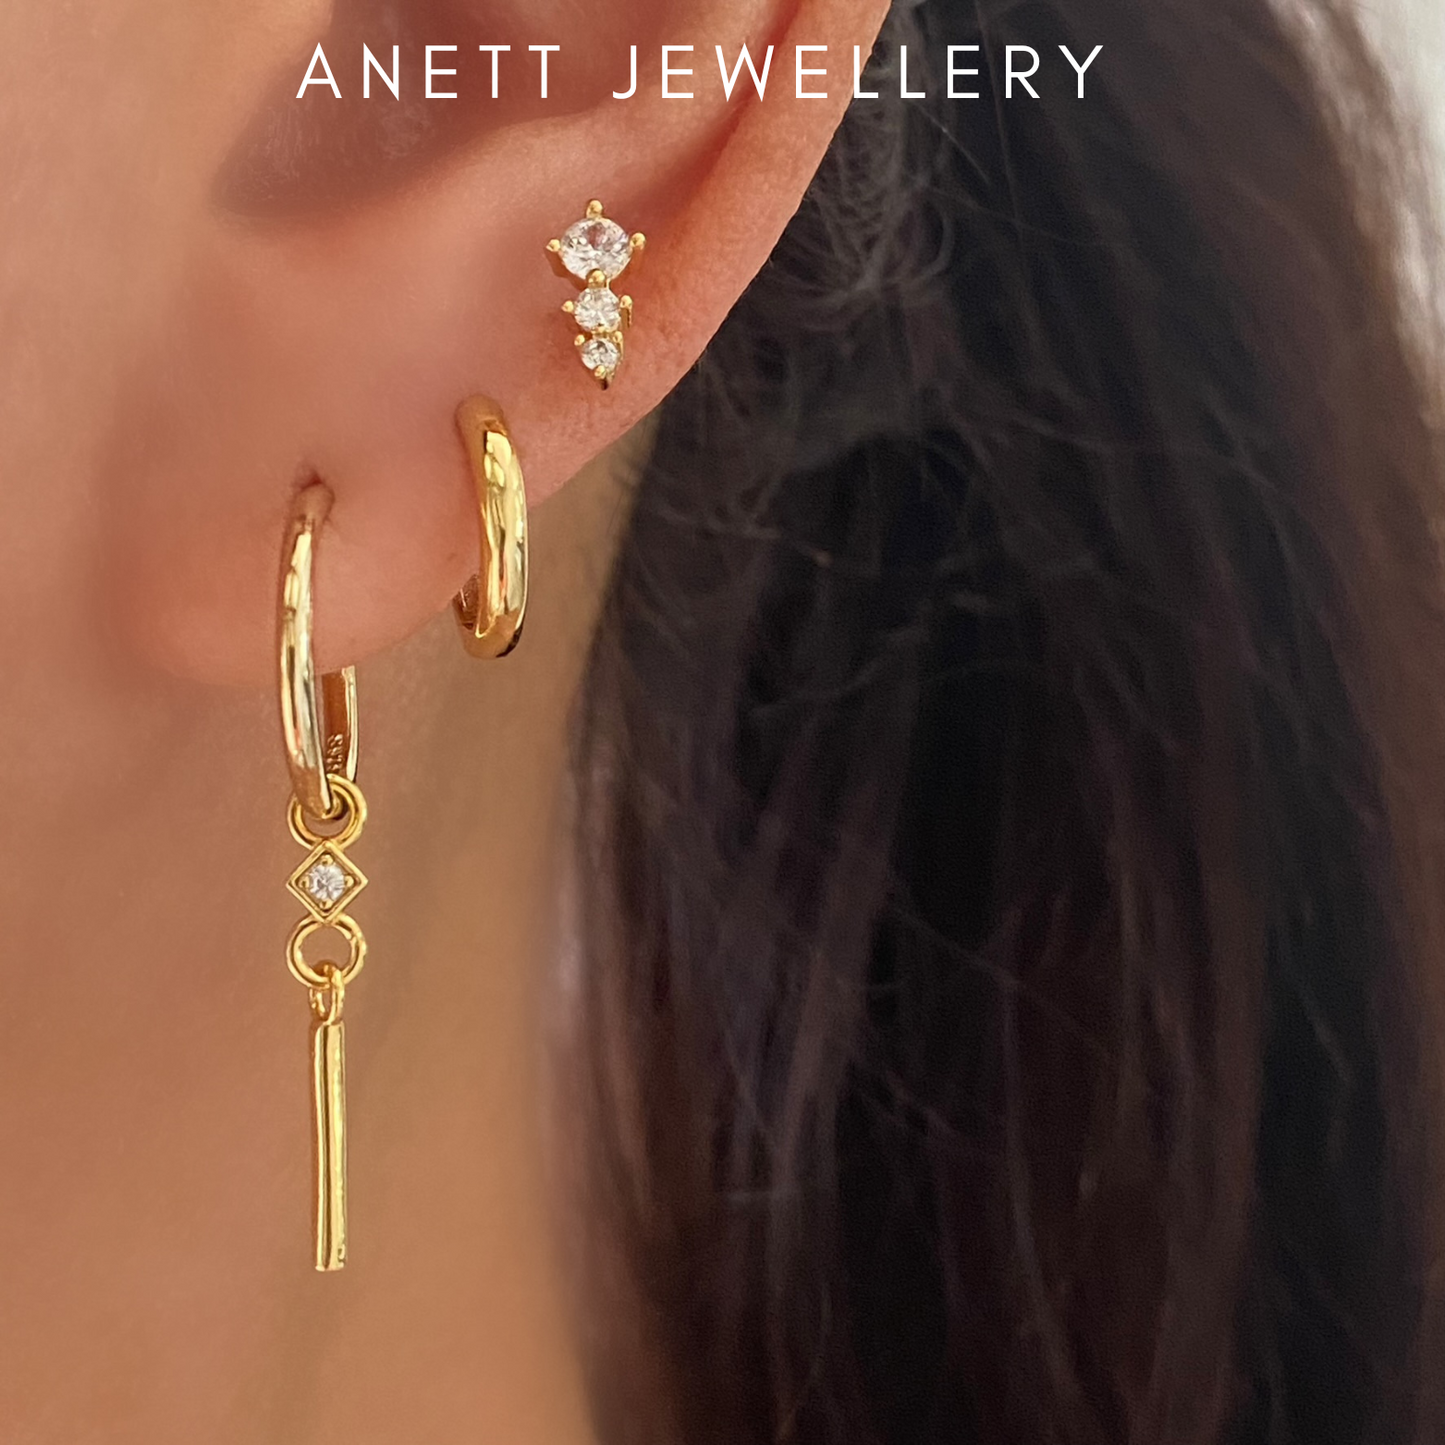 Dangly Ear Stack Set, 925 Sterling Silver 18k Gold Plated, Gold Huggie Hoop, Cubic Stud Earring, Gift for her, 3 pieces Gold Earring Set